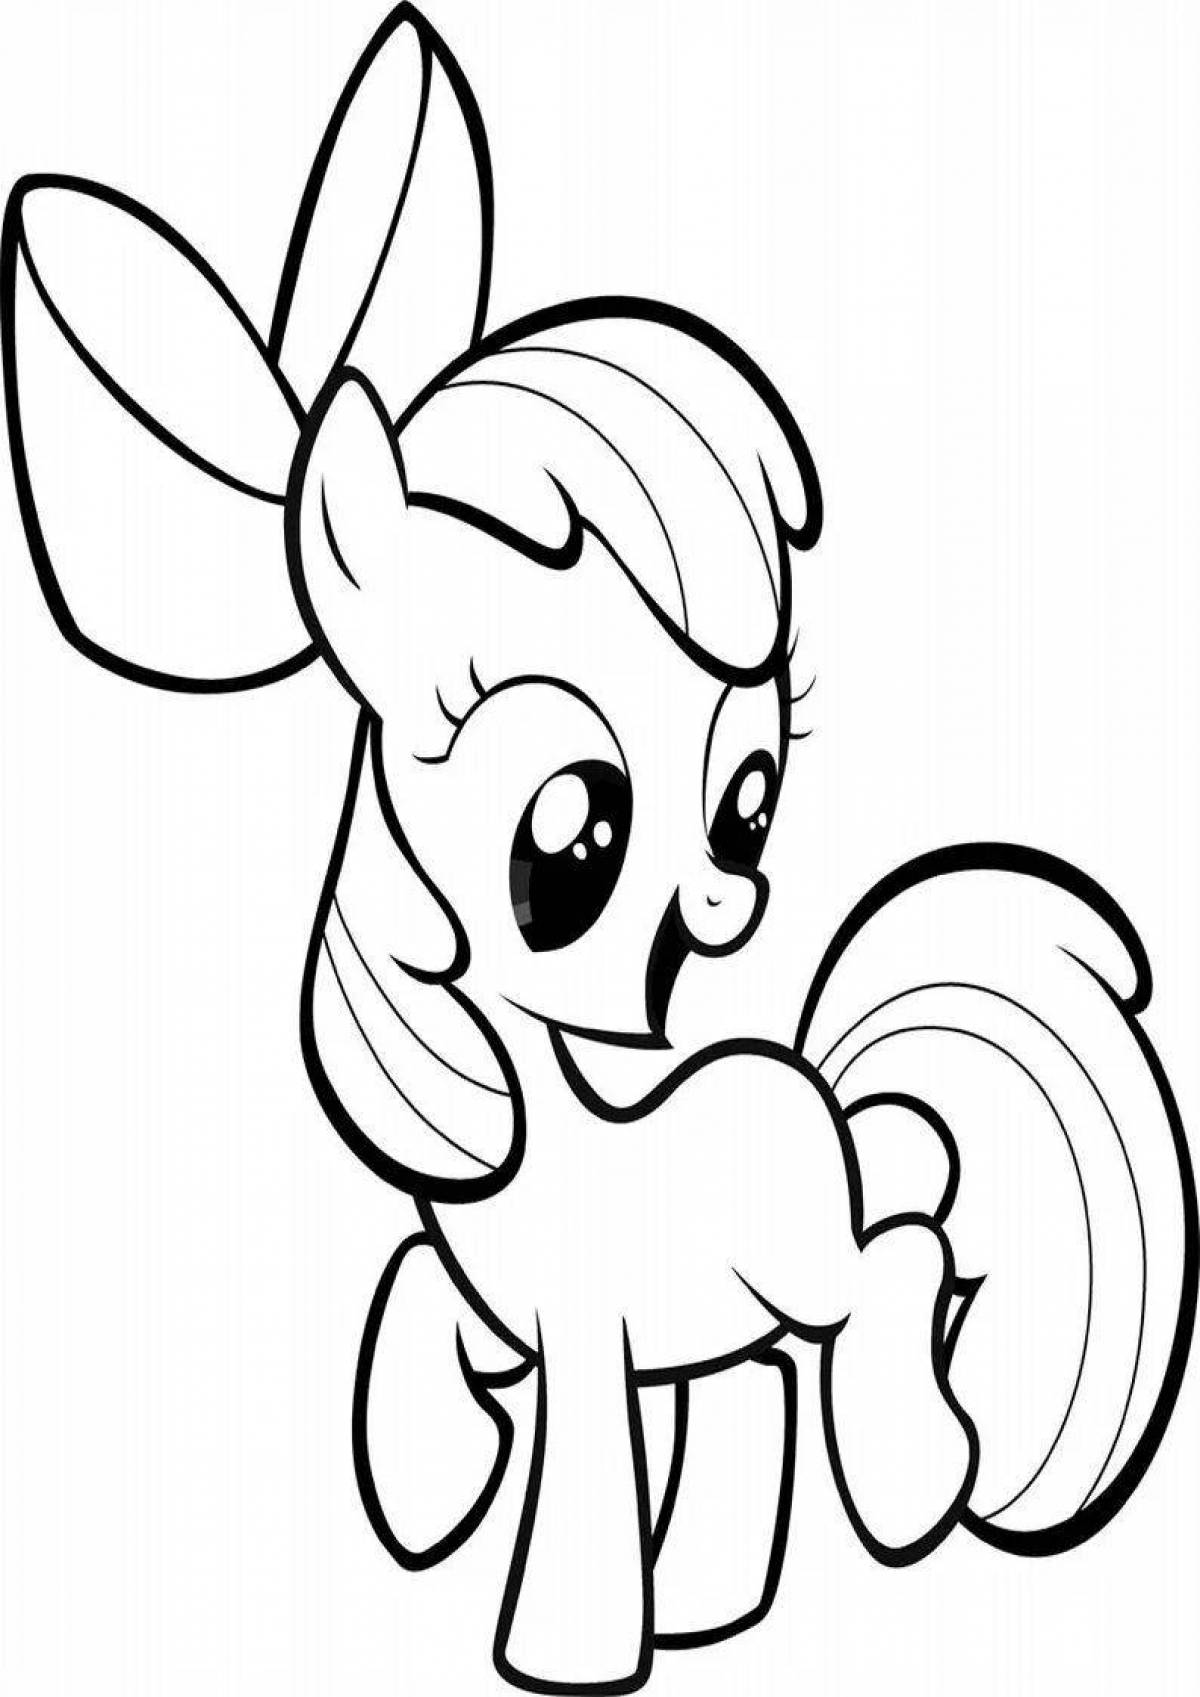 Animated apple bloom coloring page